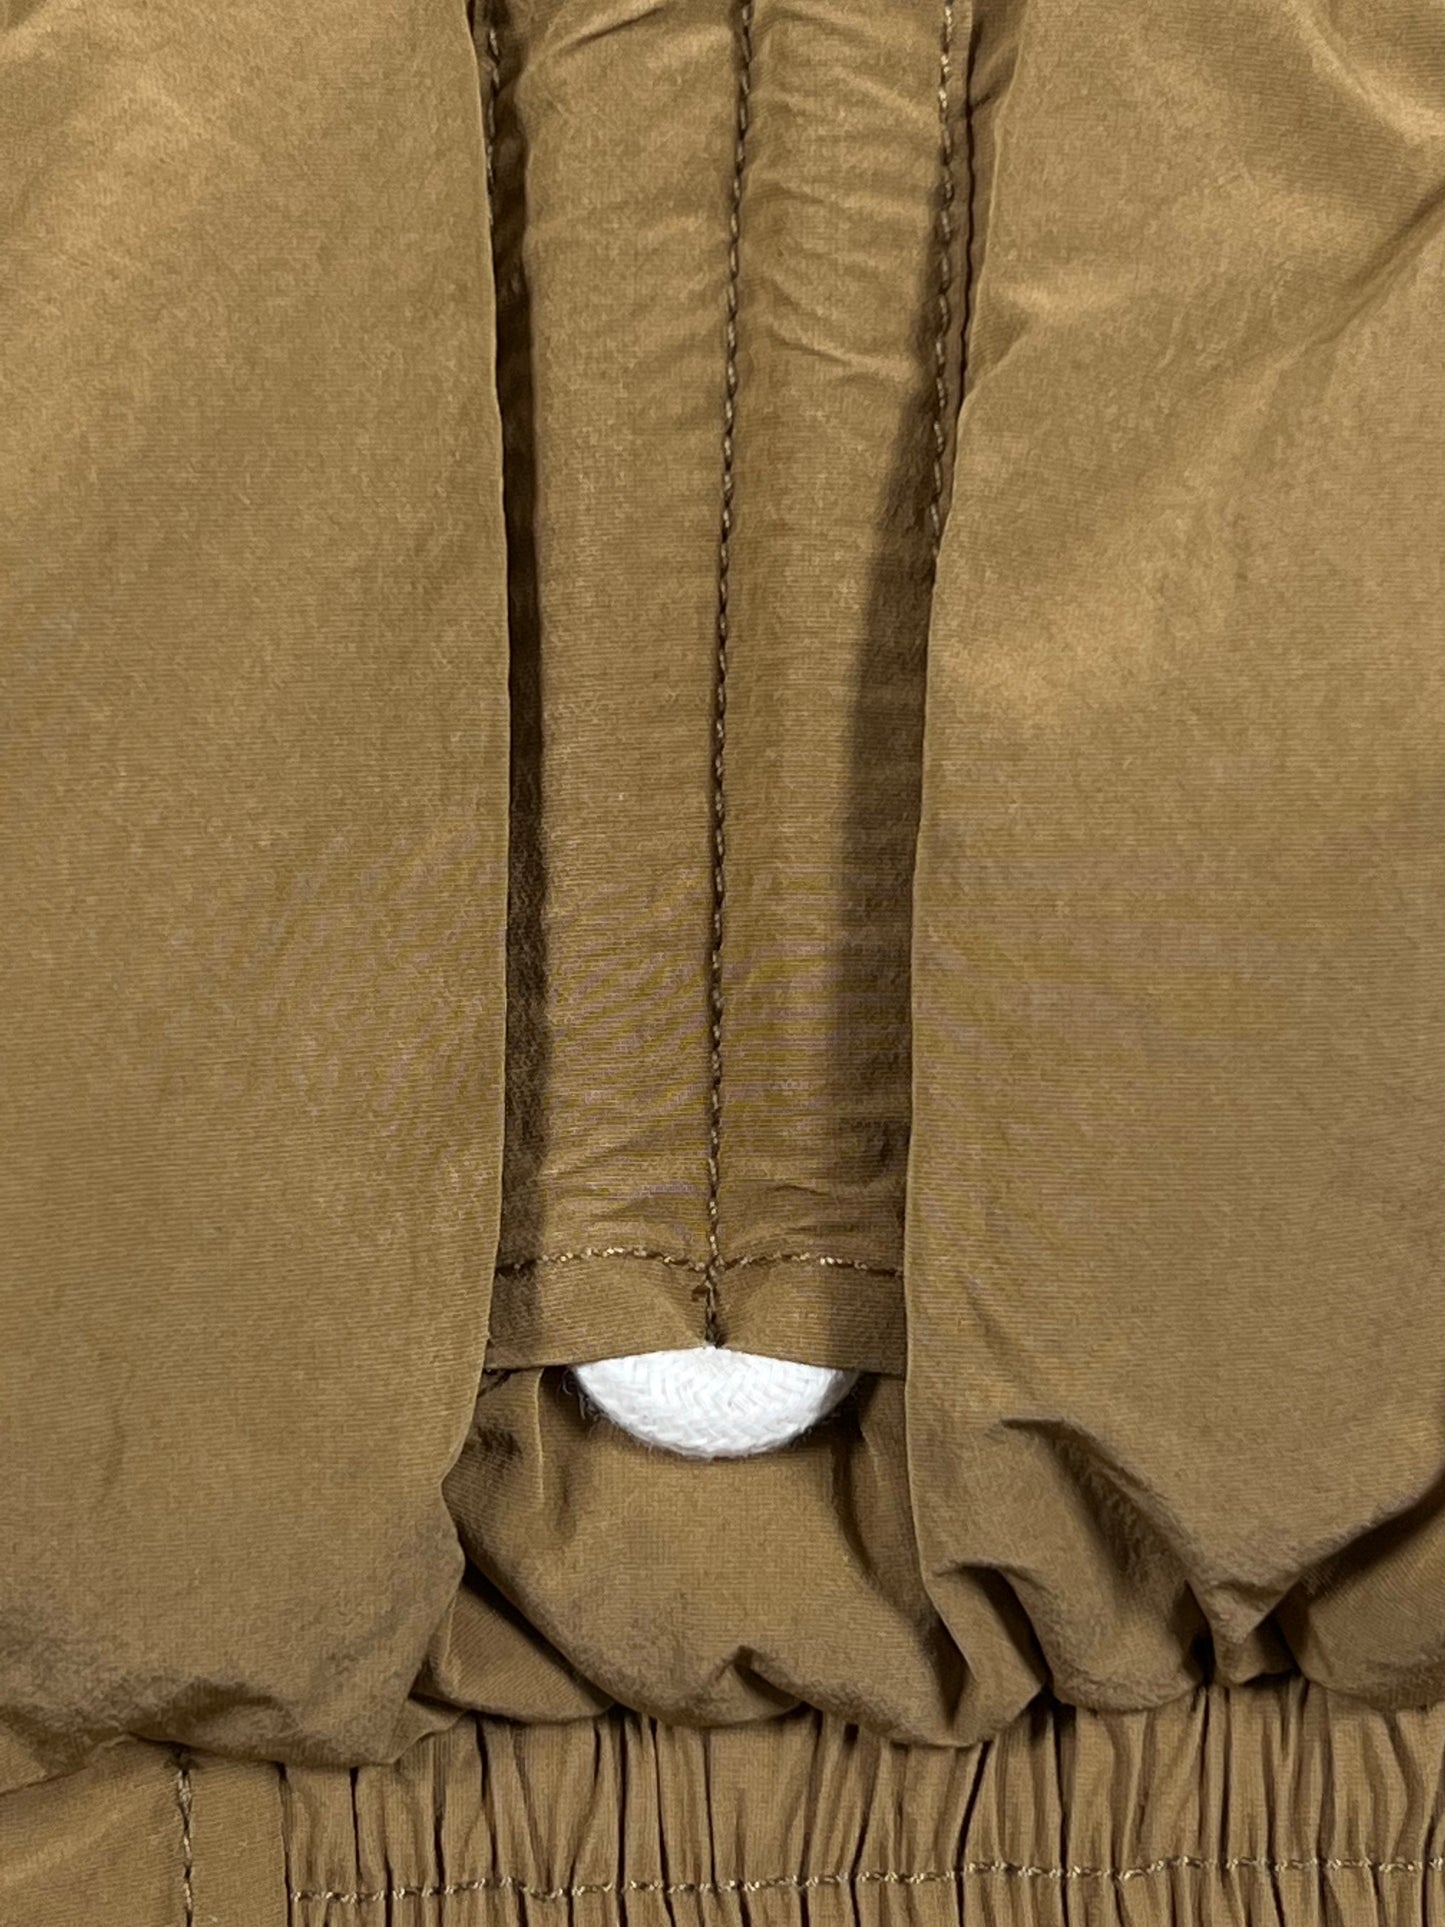 A close up of a tan, water-repellent DIESEL W-ERIC JACKET SPONGE with a zipper.